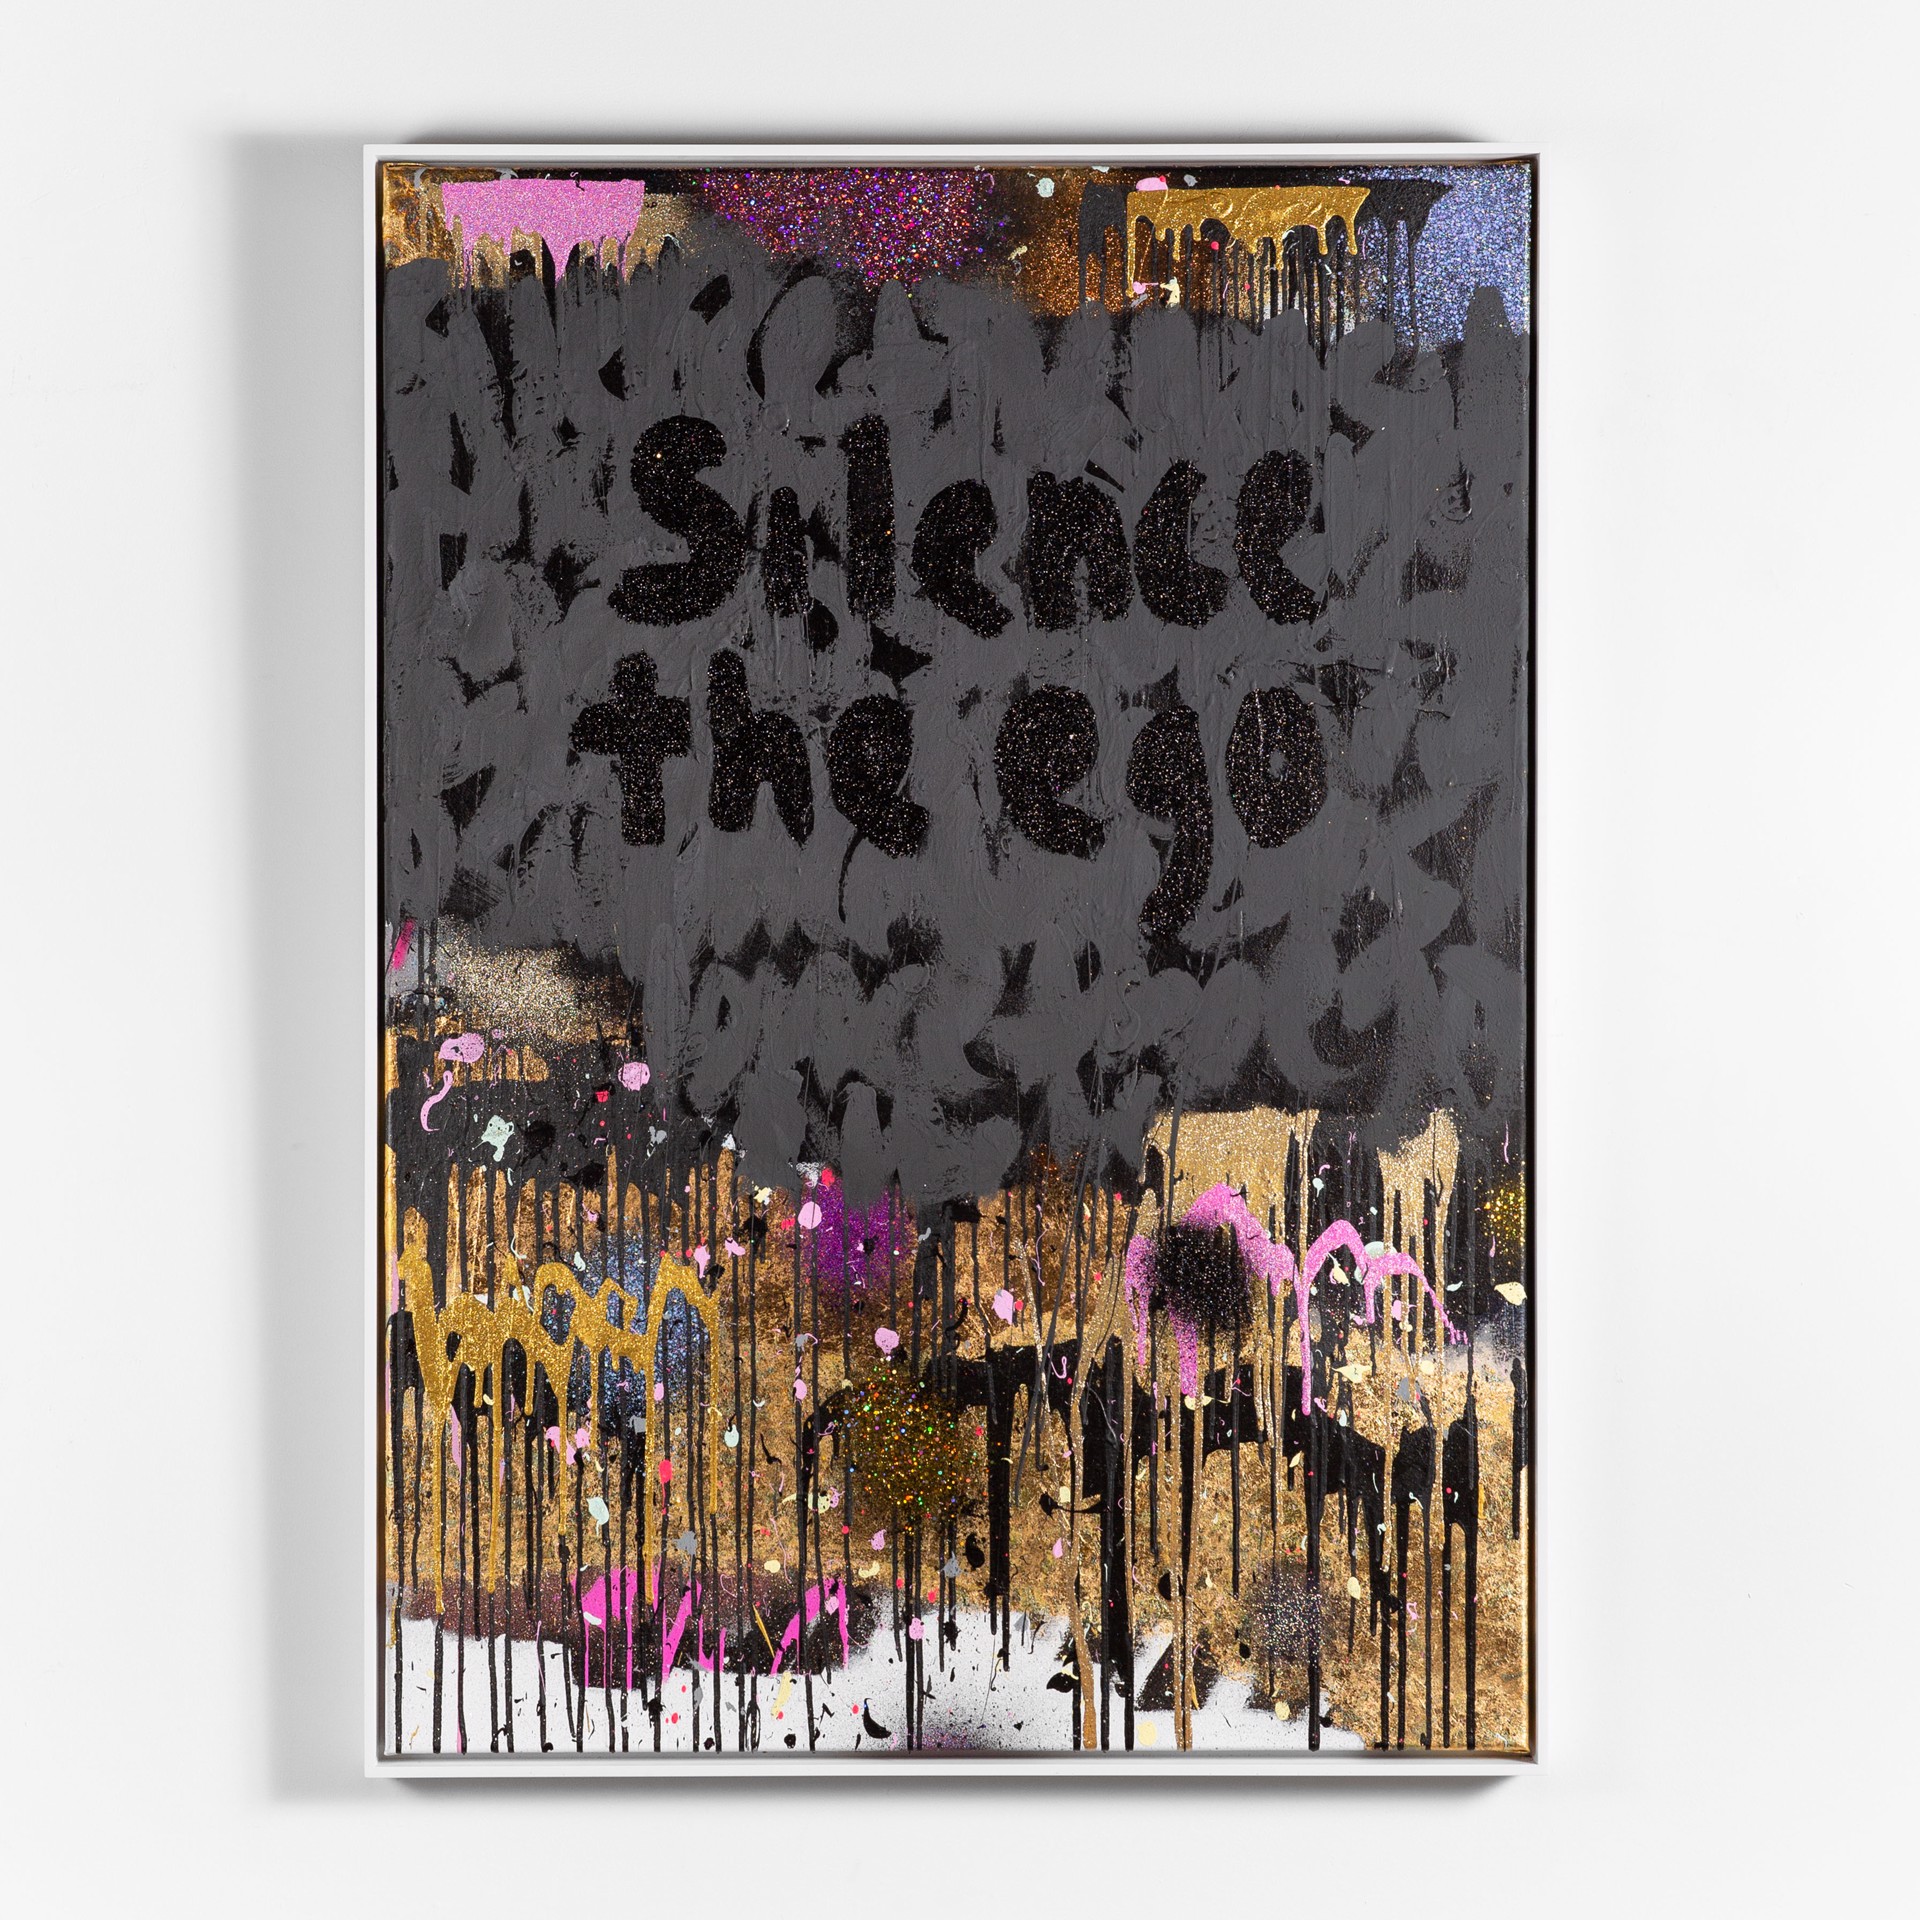 Silence the Ego by Jeremy Brown